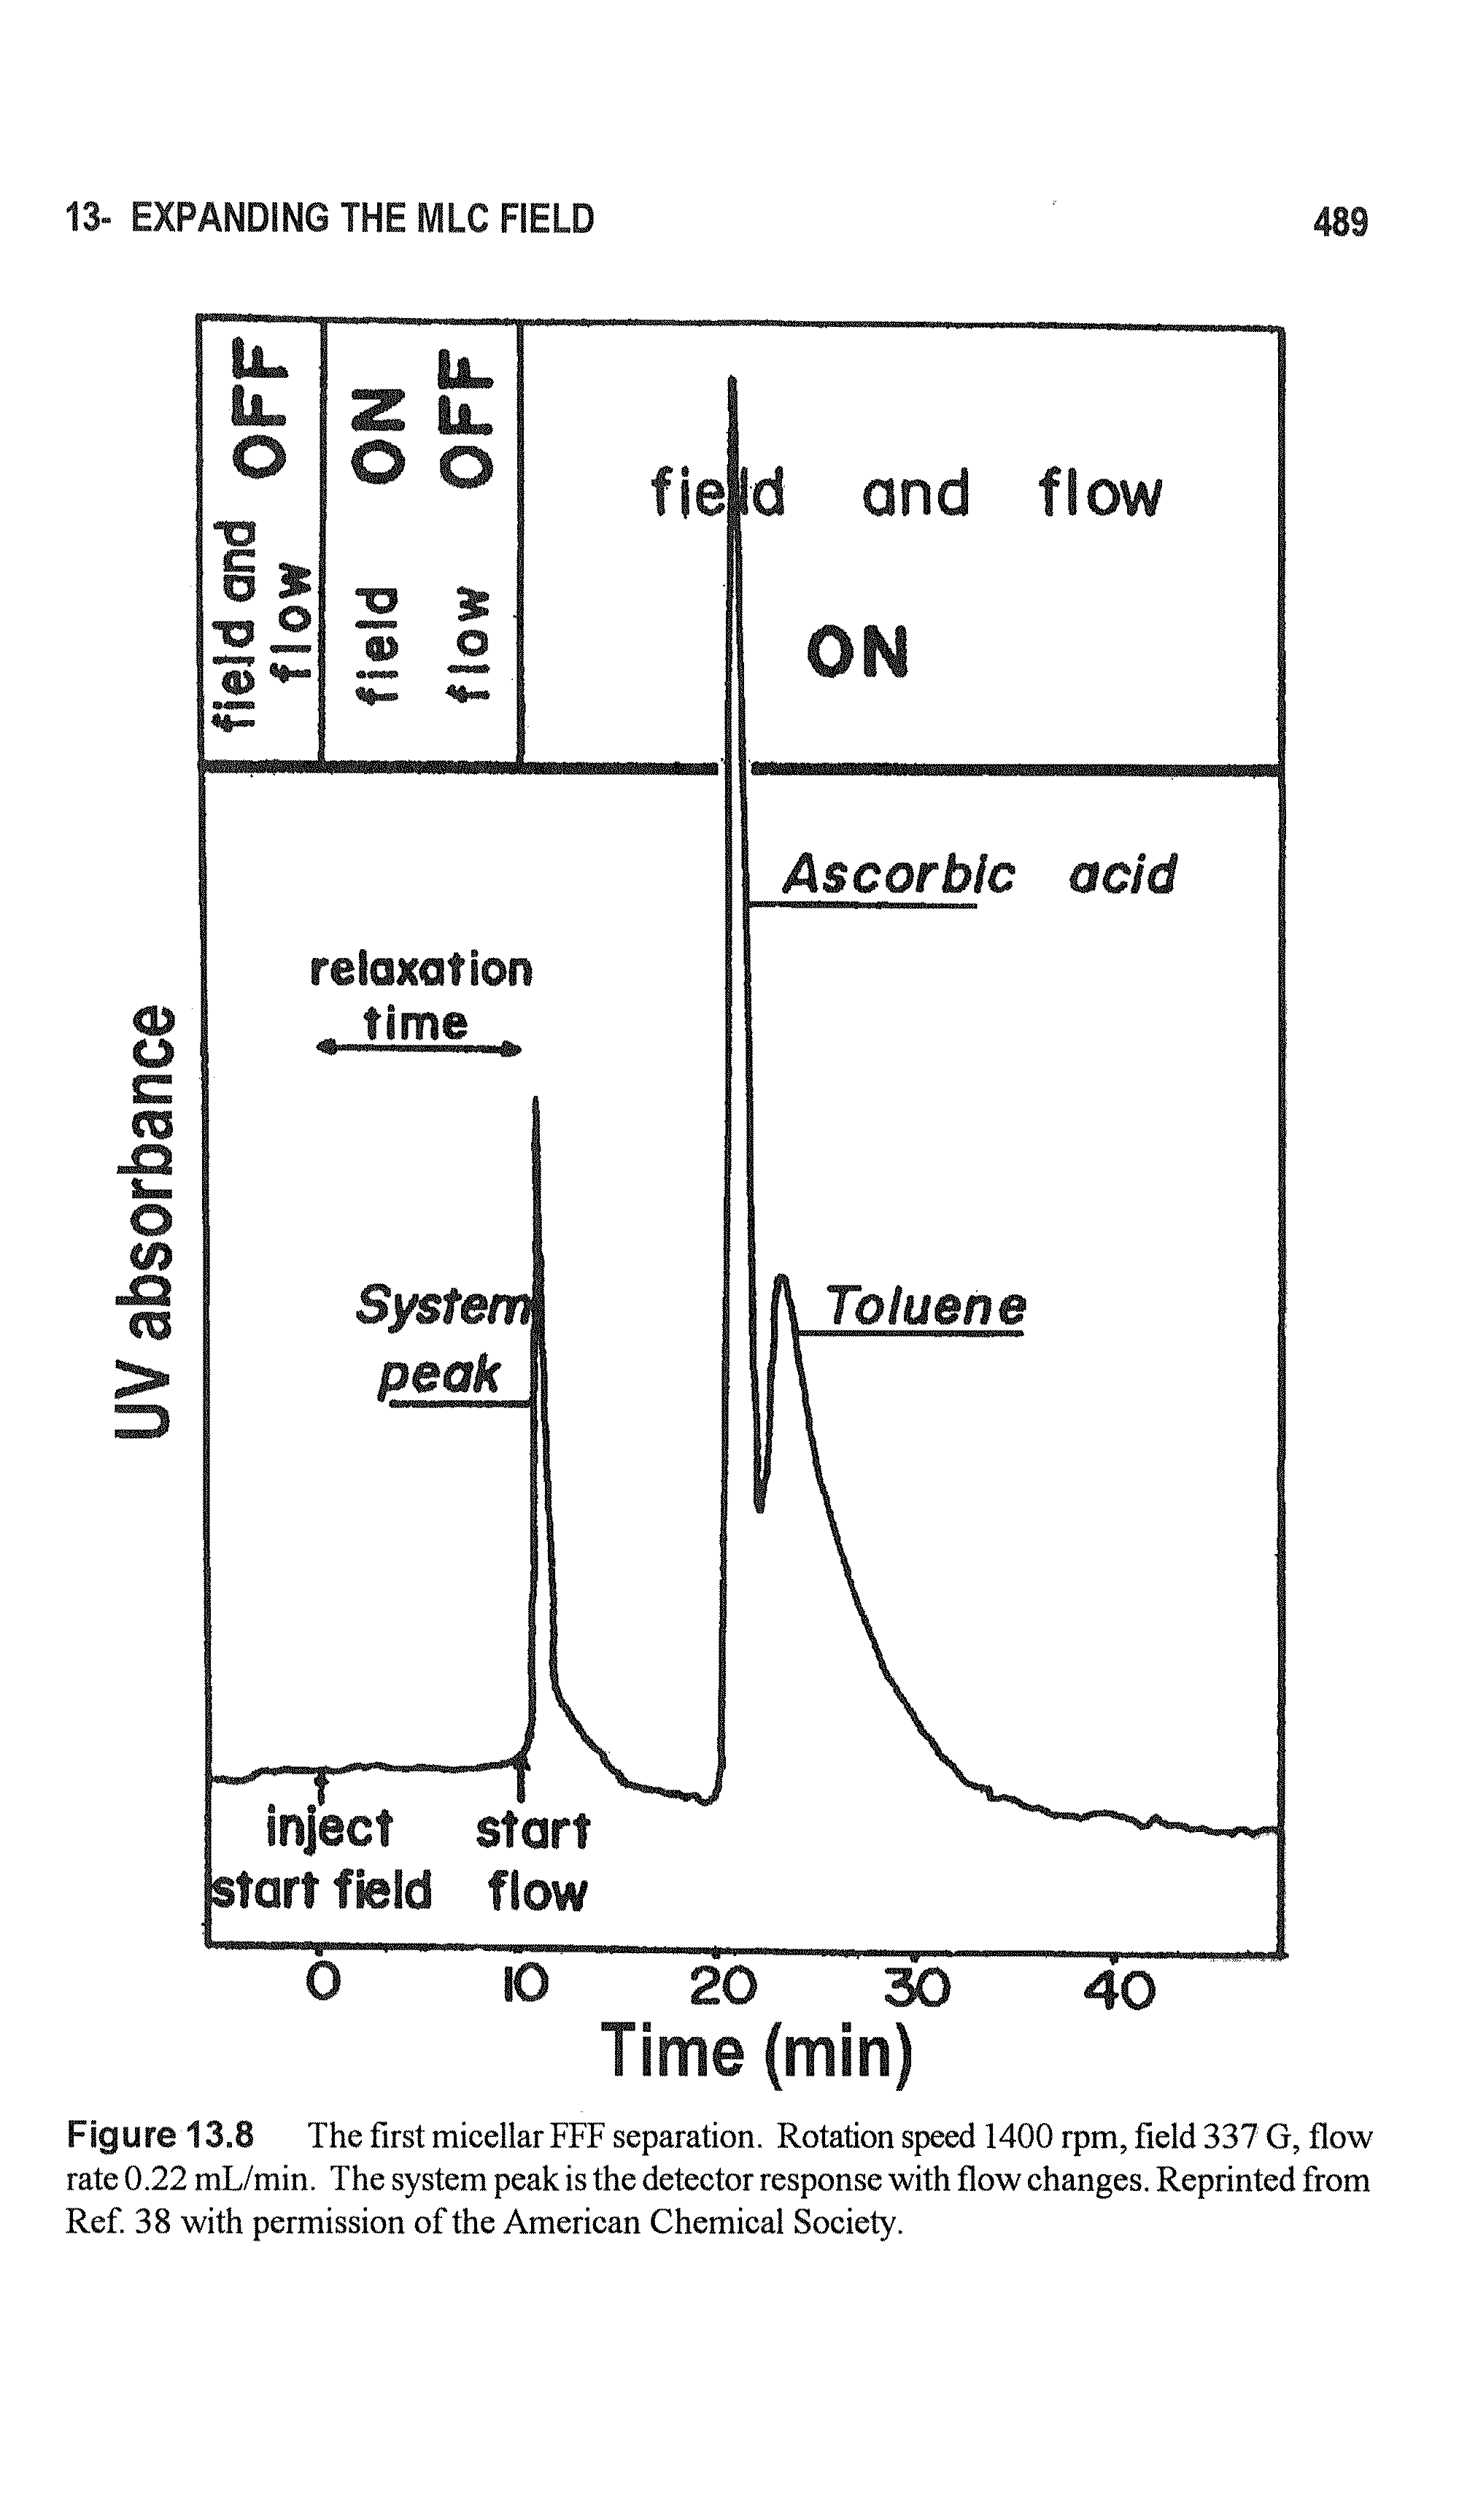 Figure 13.8 The first micellarFFF separation. Rotation speed 1400 rpm, field 337 G, flow rate 0.22 mL/min. The system peak is the detector response with flow changes. Reprinted from Ref. 38 with permission of the American Chemical Society.